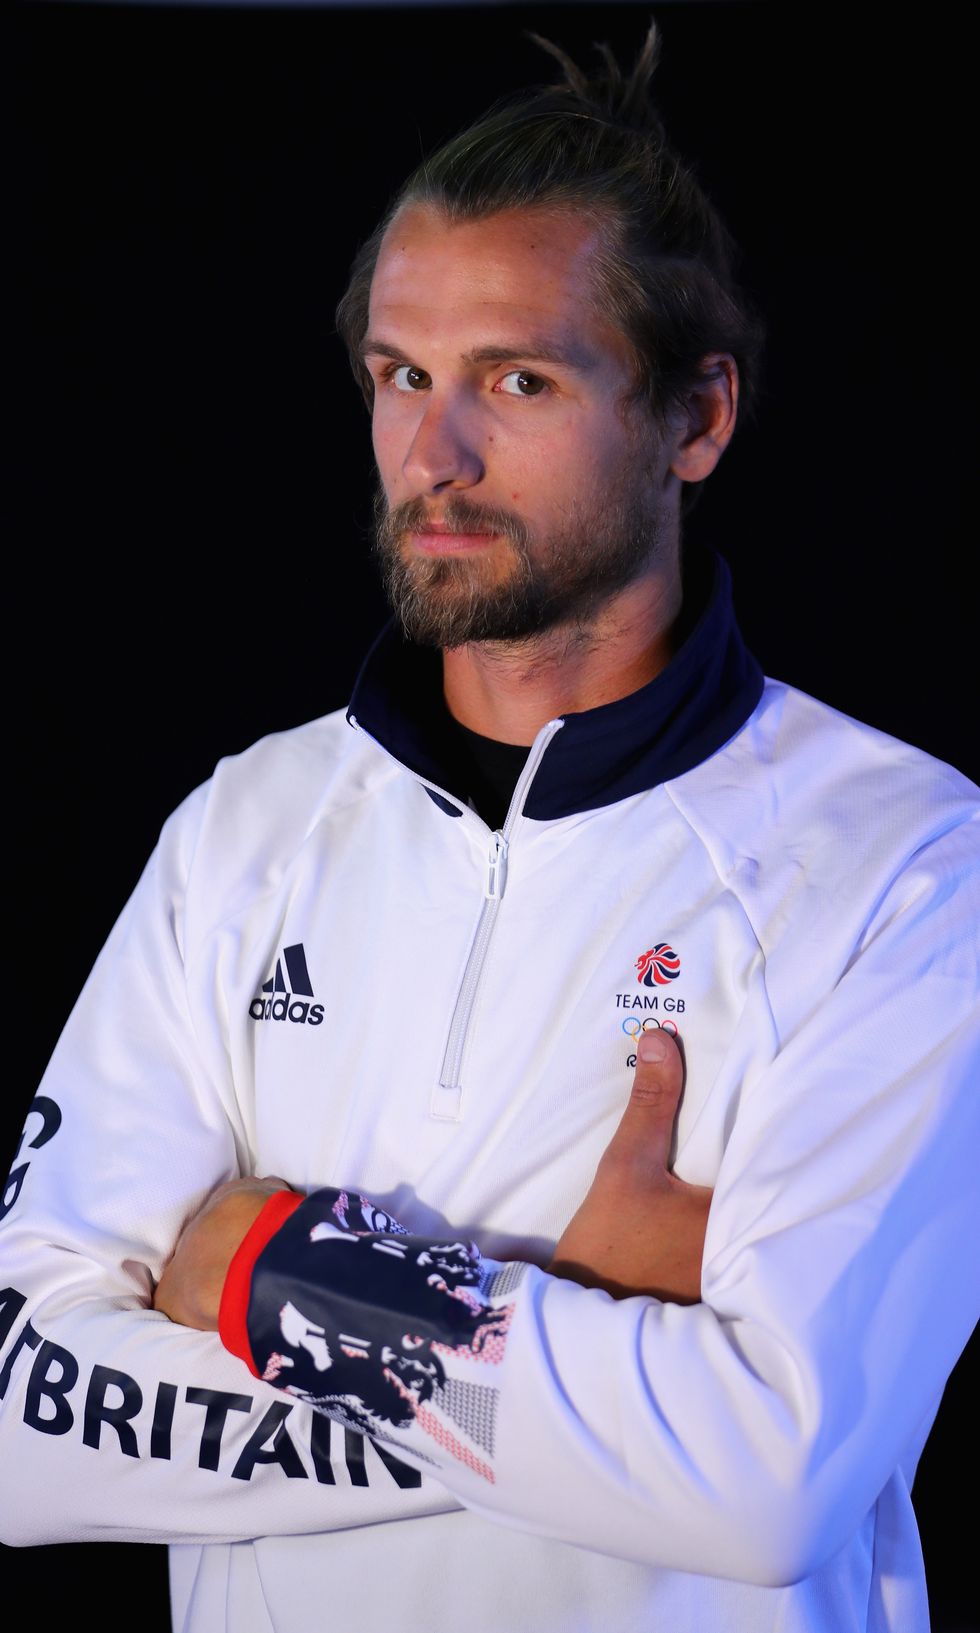 Paul Bennett hot British rower at the men's eight in the Olympics